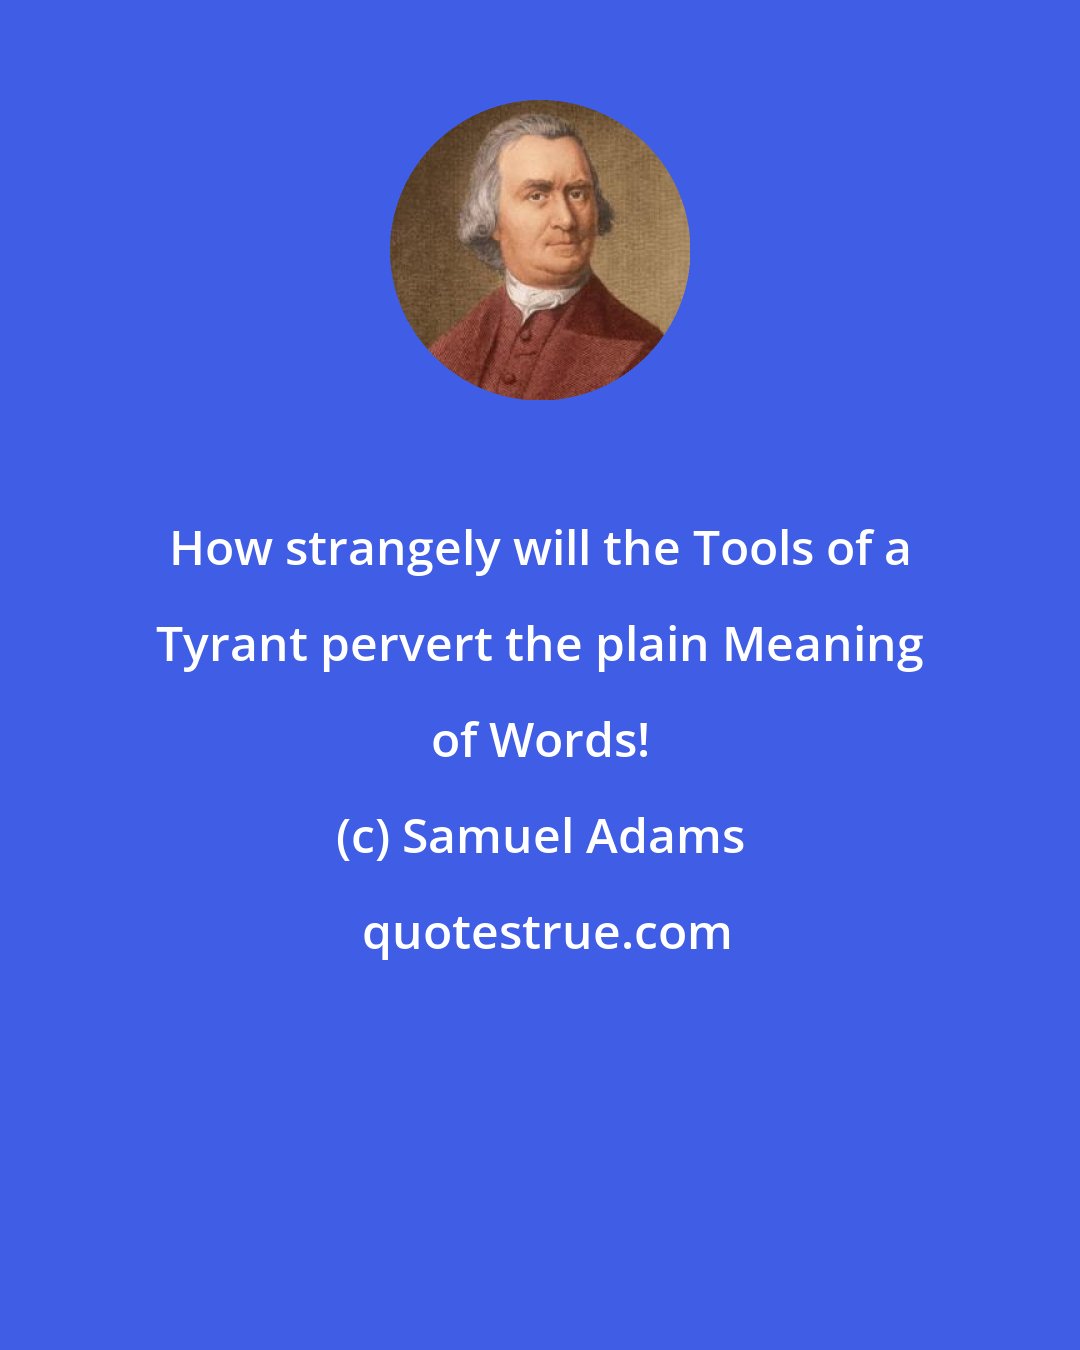 Samuel Adams: How strangely will the Tools of a Tyrant pervert the plain Meaning of Words!